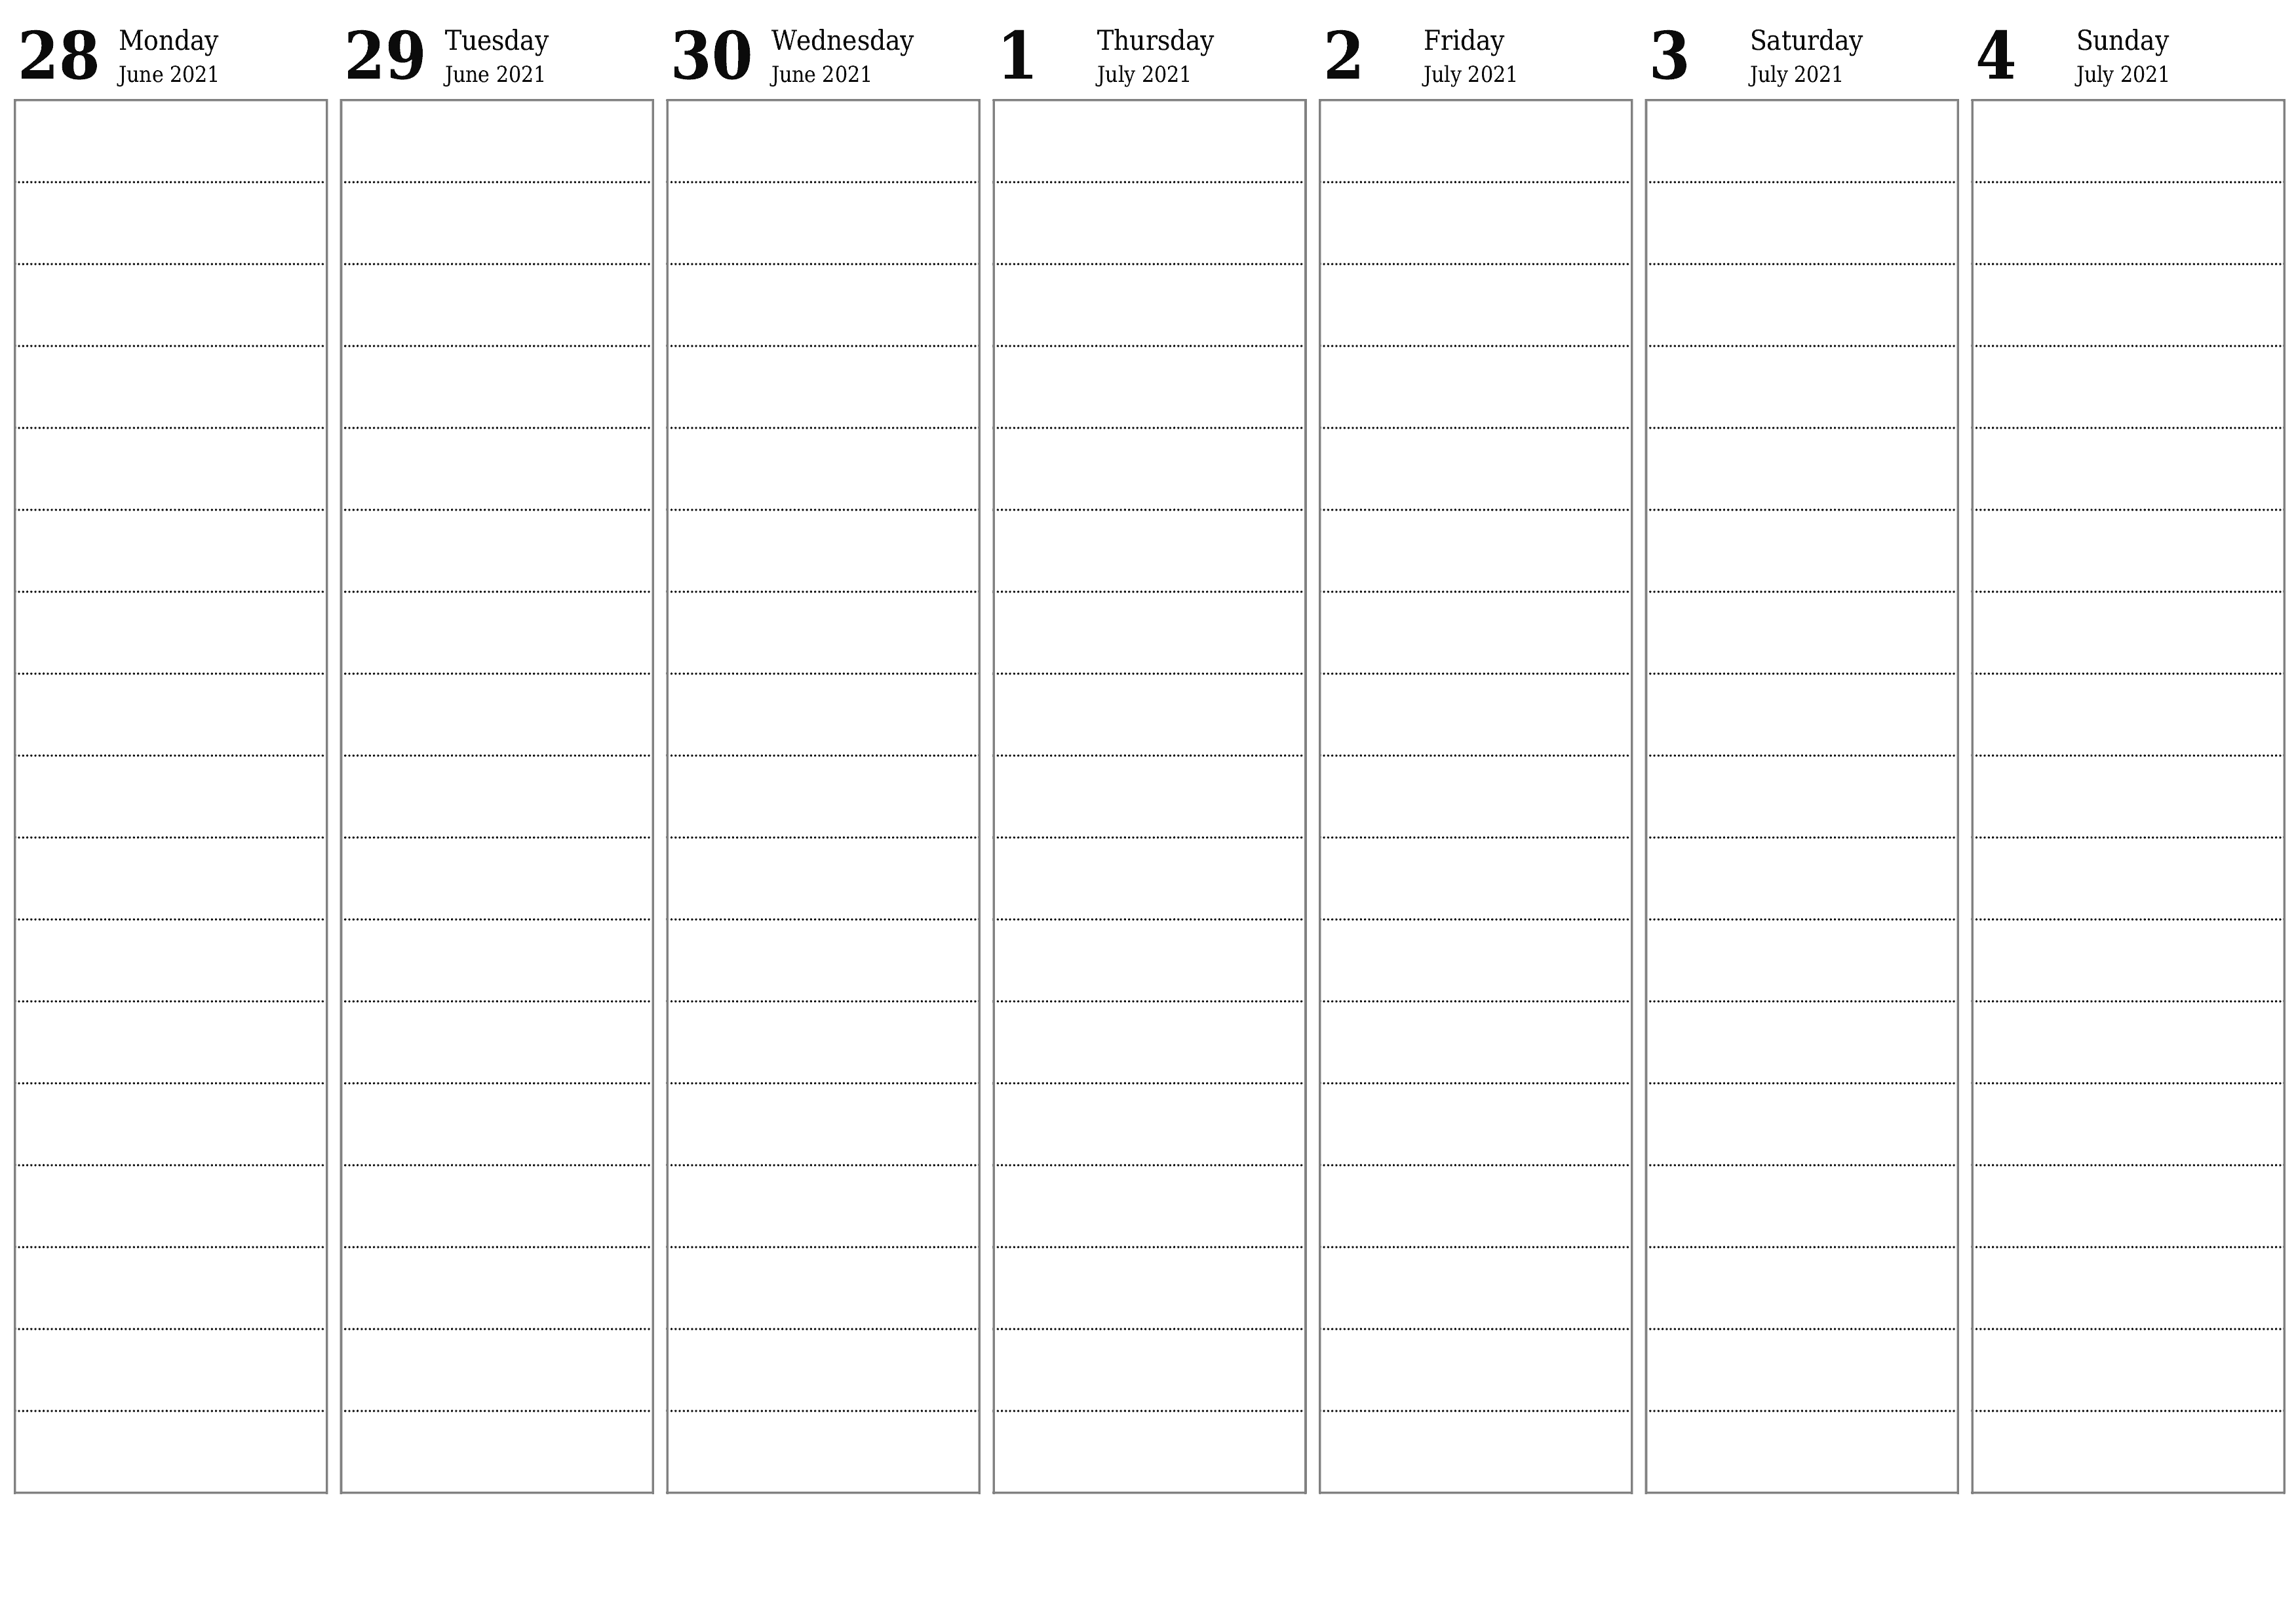 Blank weekly dated HD template image of calendar for week July 2021 save and print to PDF PNG English - 7calendar.com